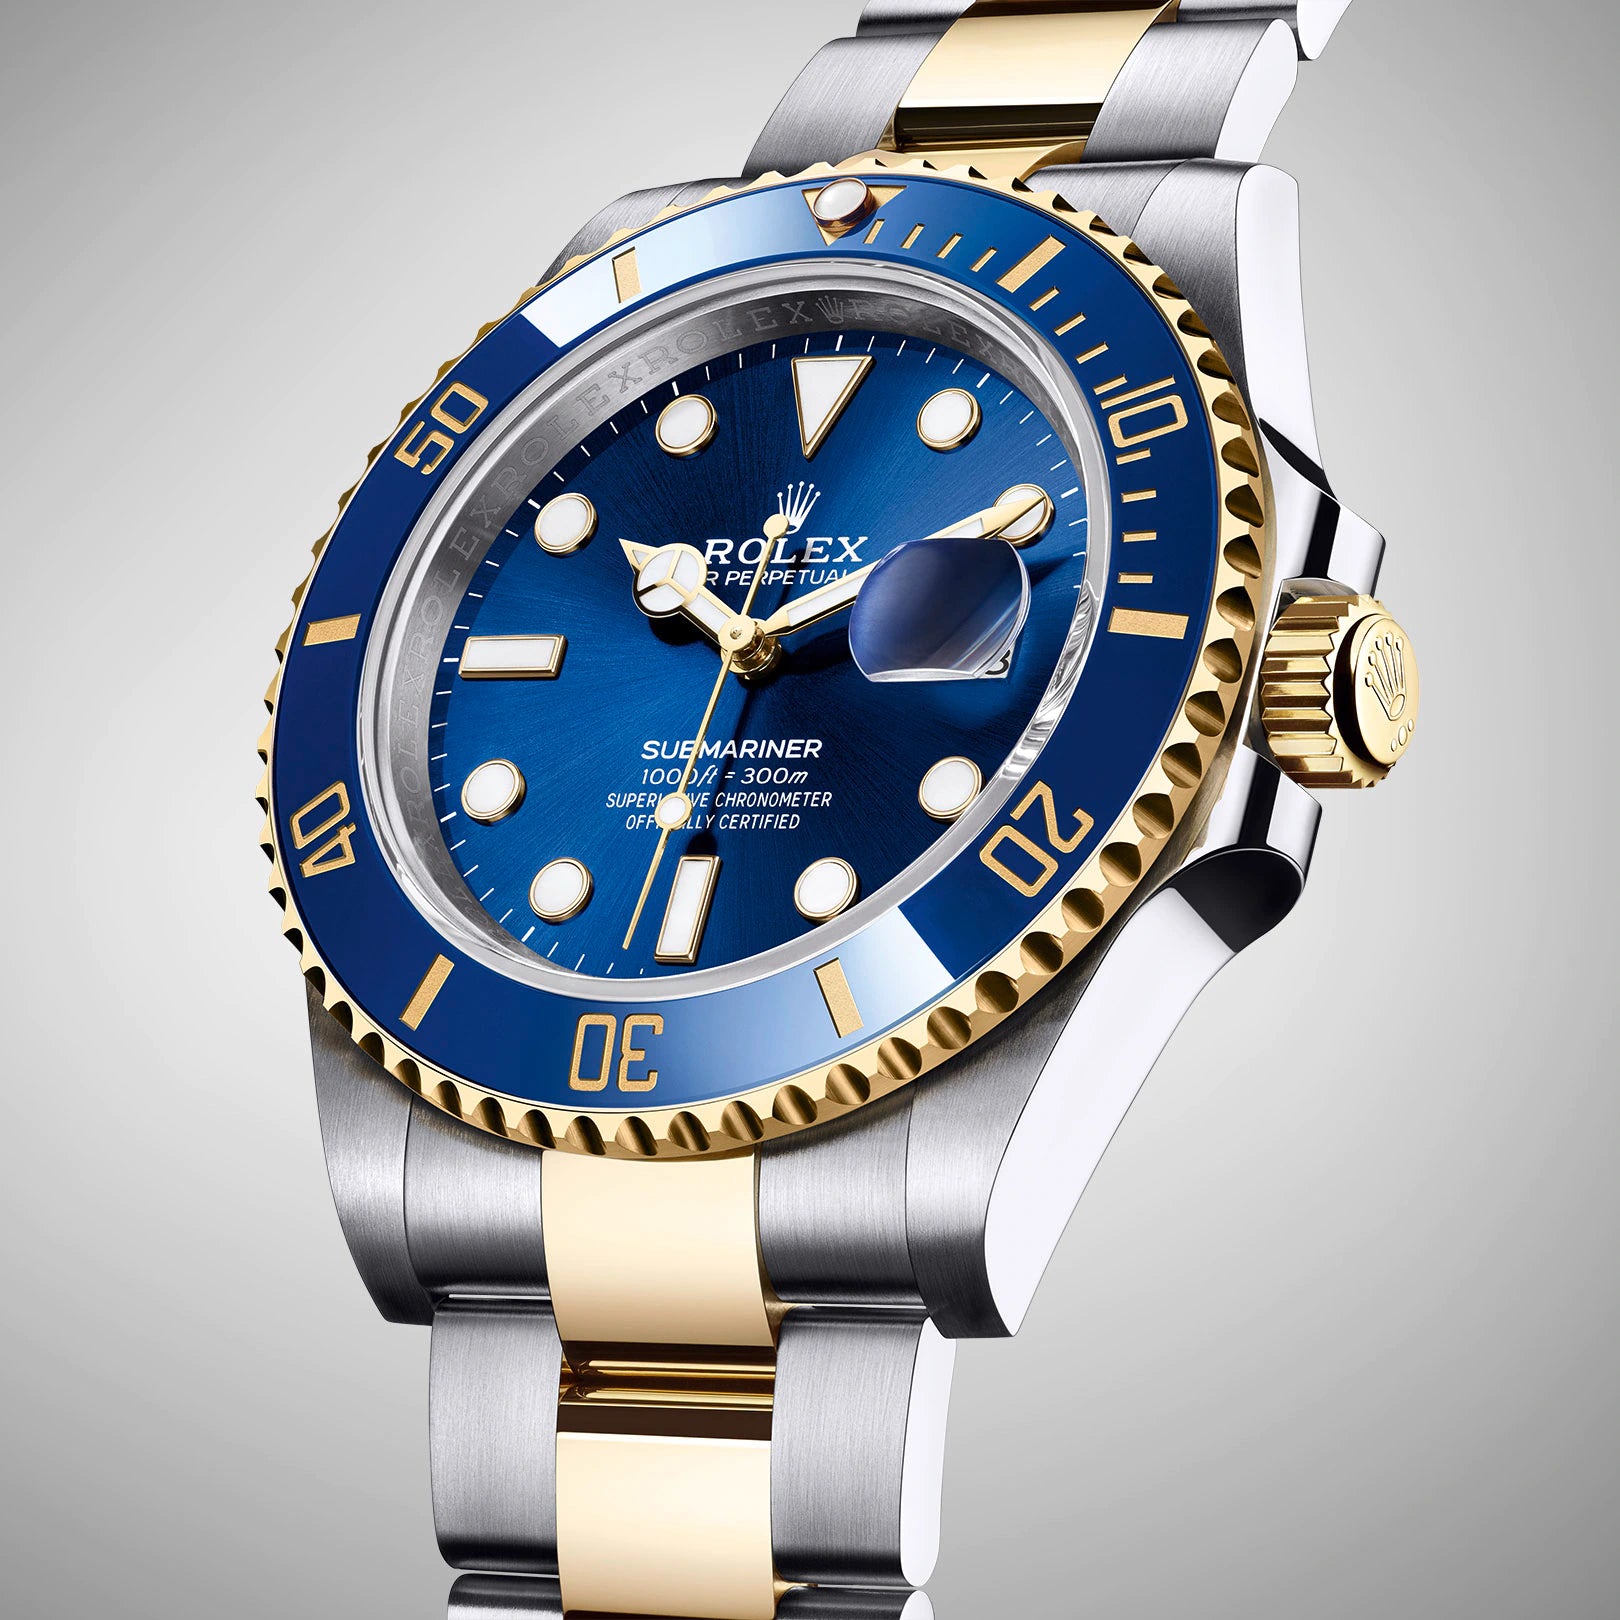 Rolex Submariner Nicknames Everest Horology Products